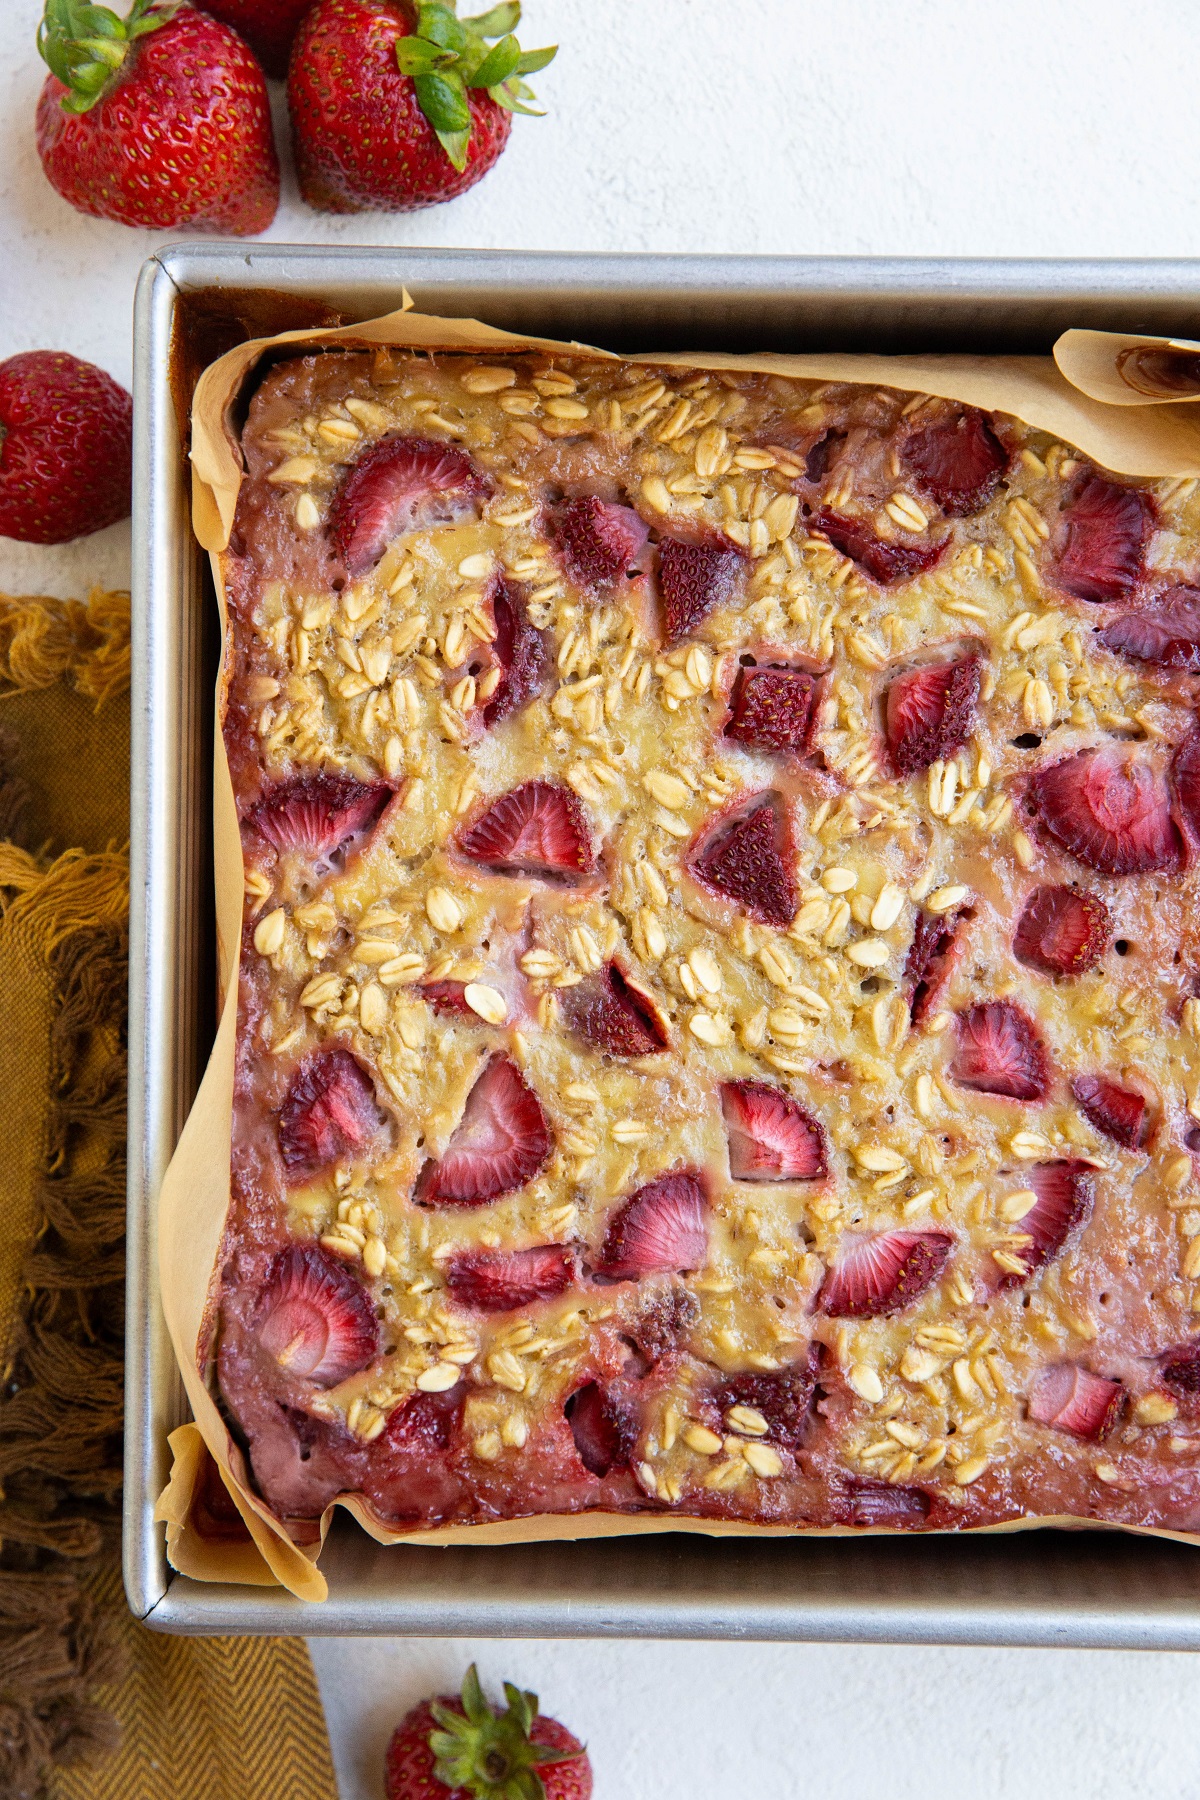 Baking pan with freshly baked strawberry baked oatmeal.